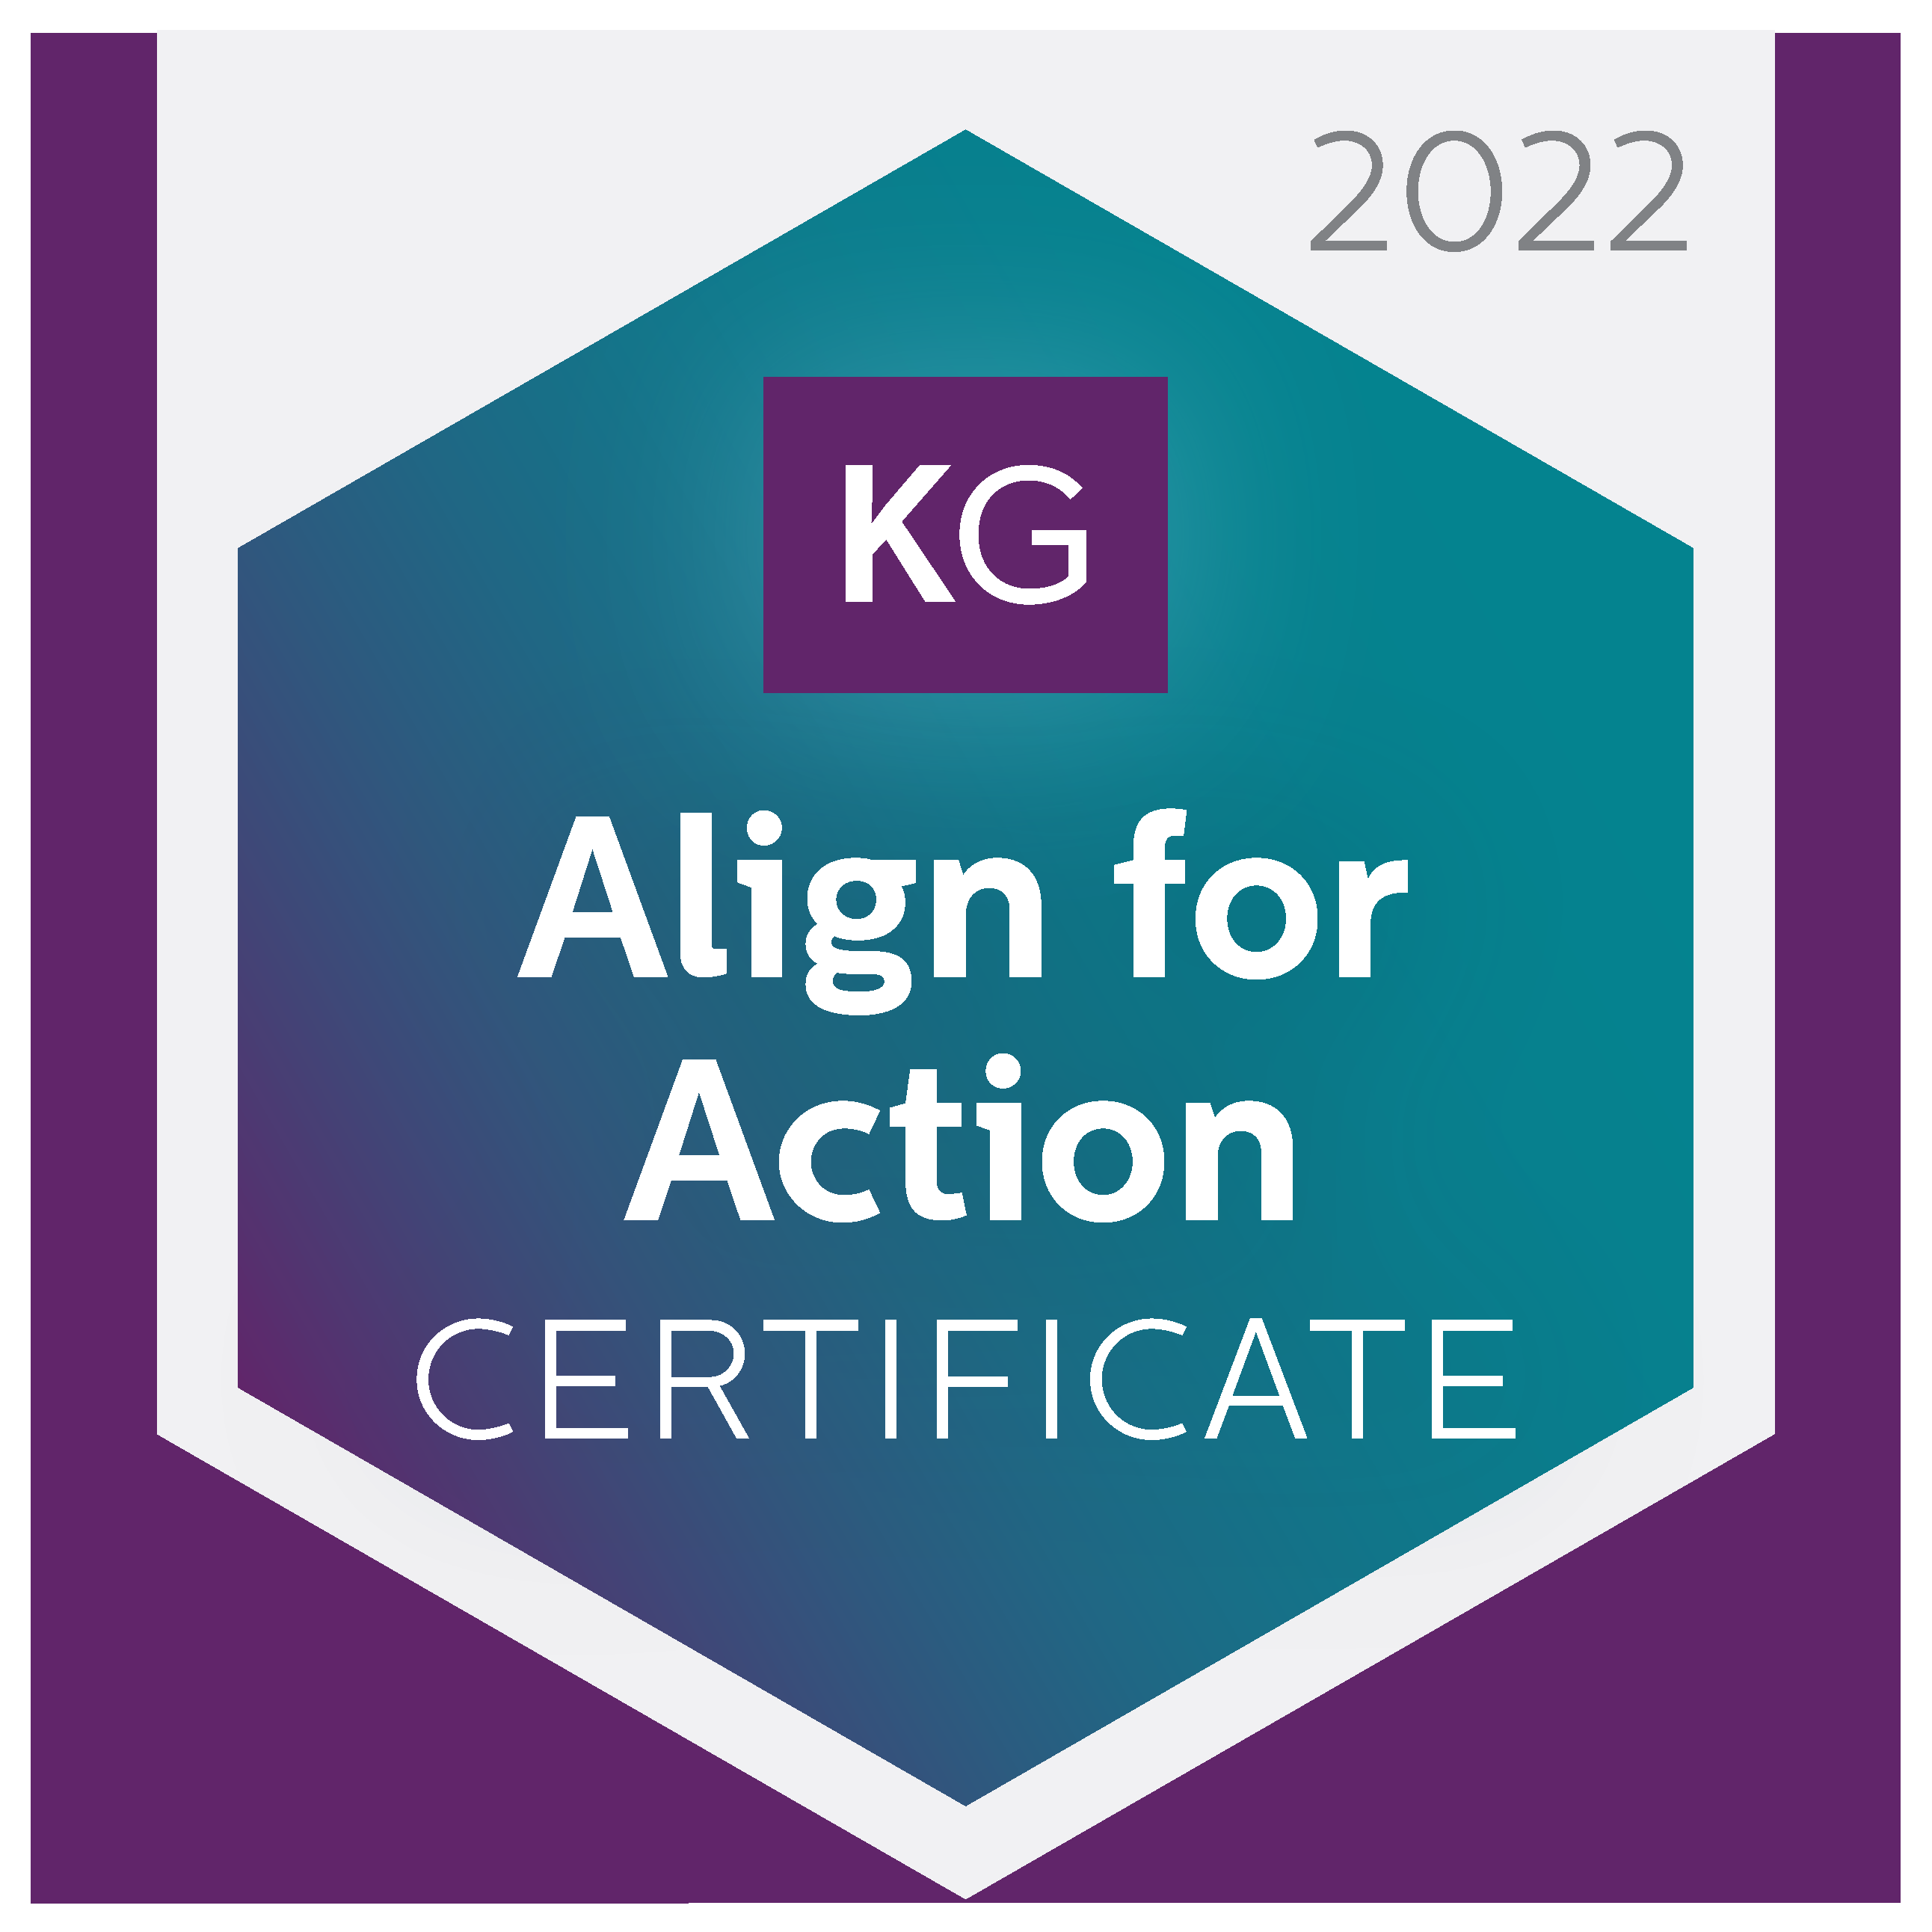 Align for Action Certificate Badge